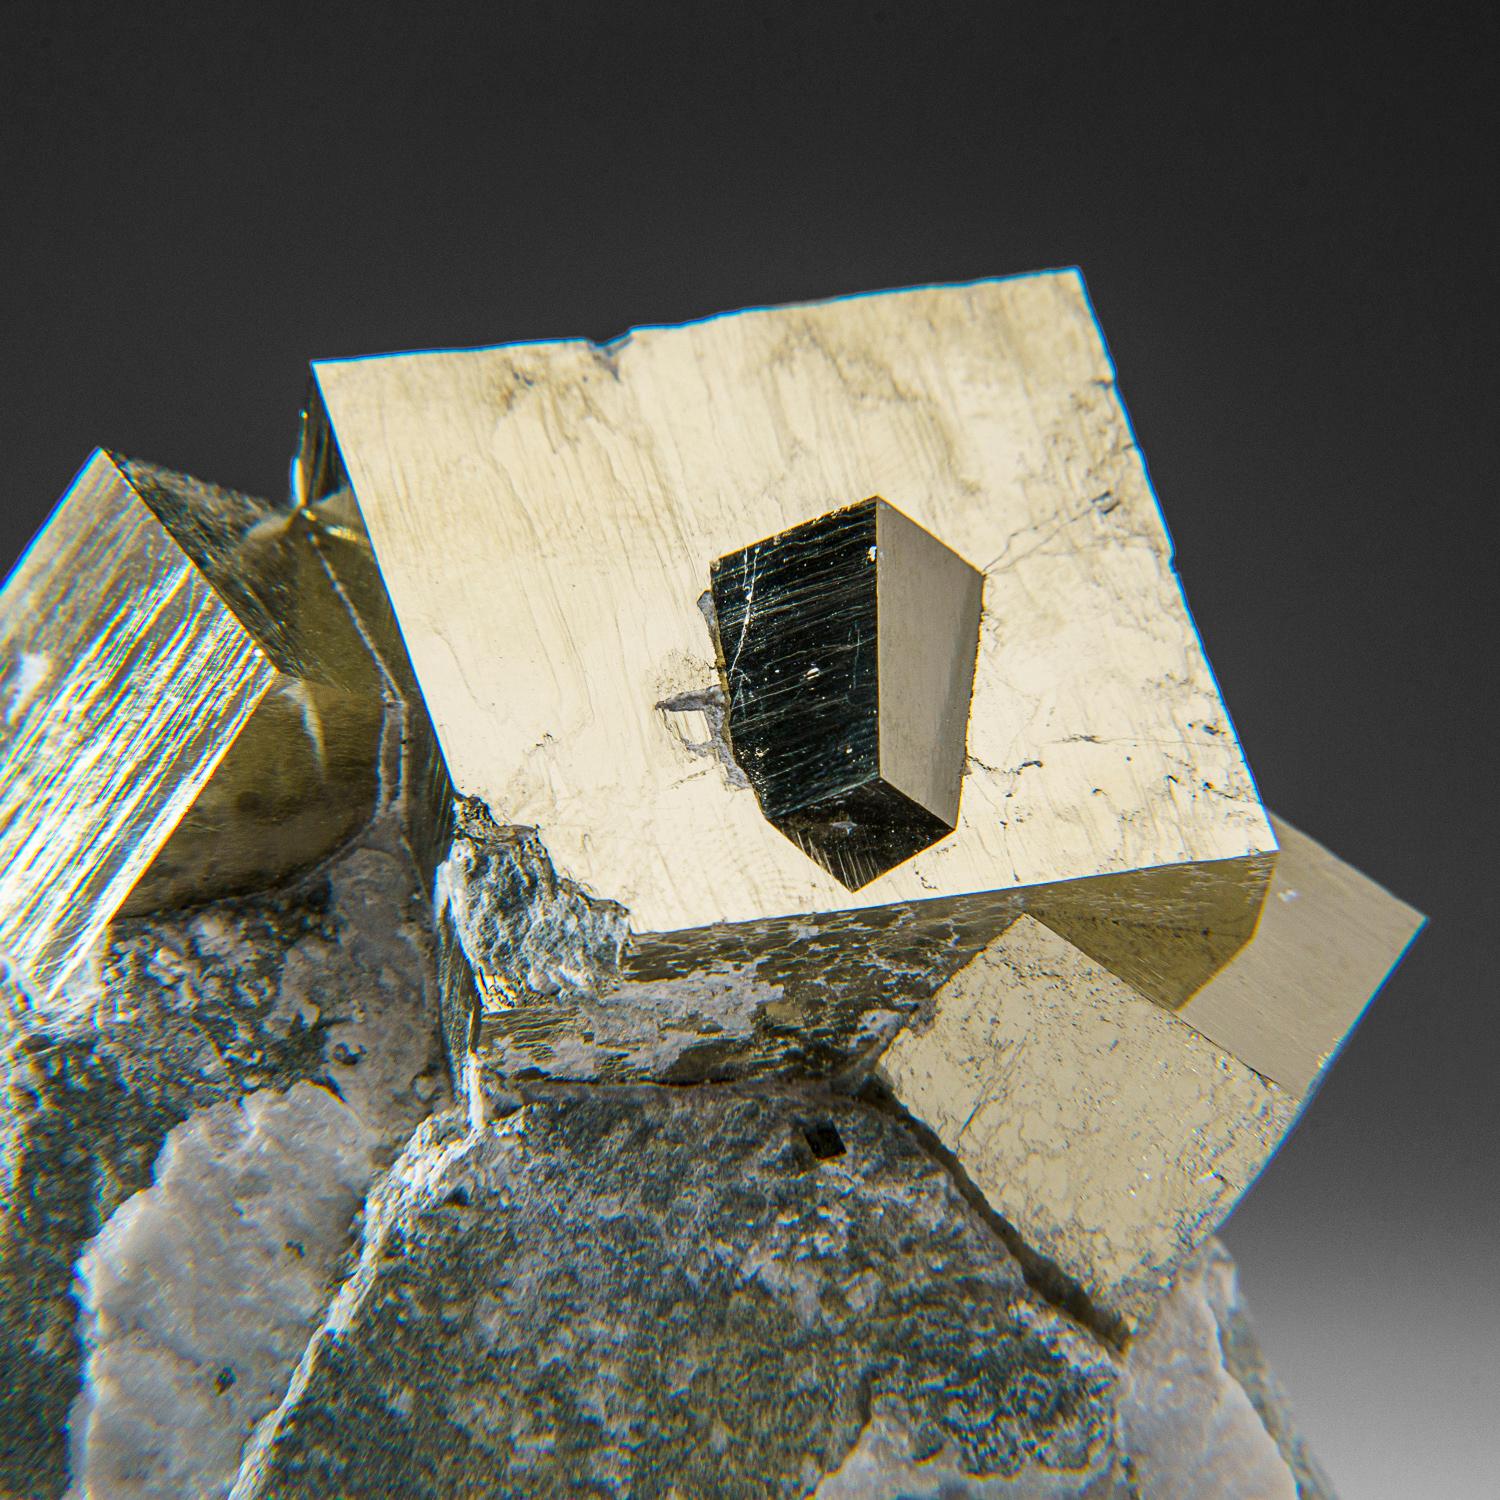 Three large cubic pyrite crystals with intergrown smaller pyrite crystals perched on Basalt matrix. The pyrite crystals have smooth faces and sharp edges, stands upright nicely without additional support. A must-have for any collection, these unique